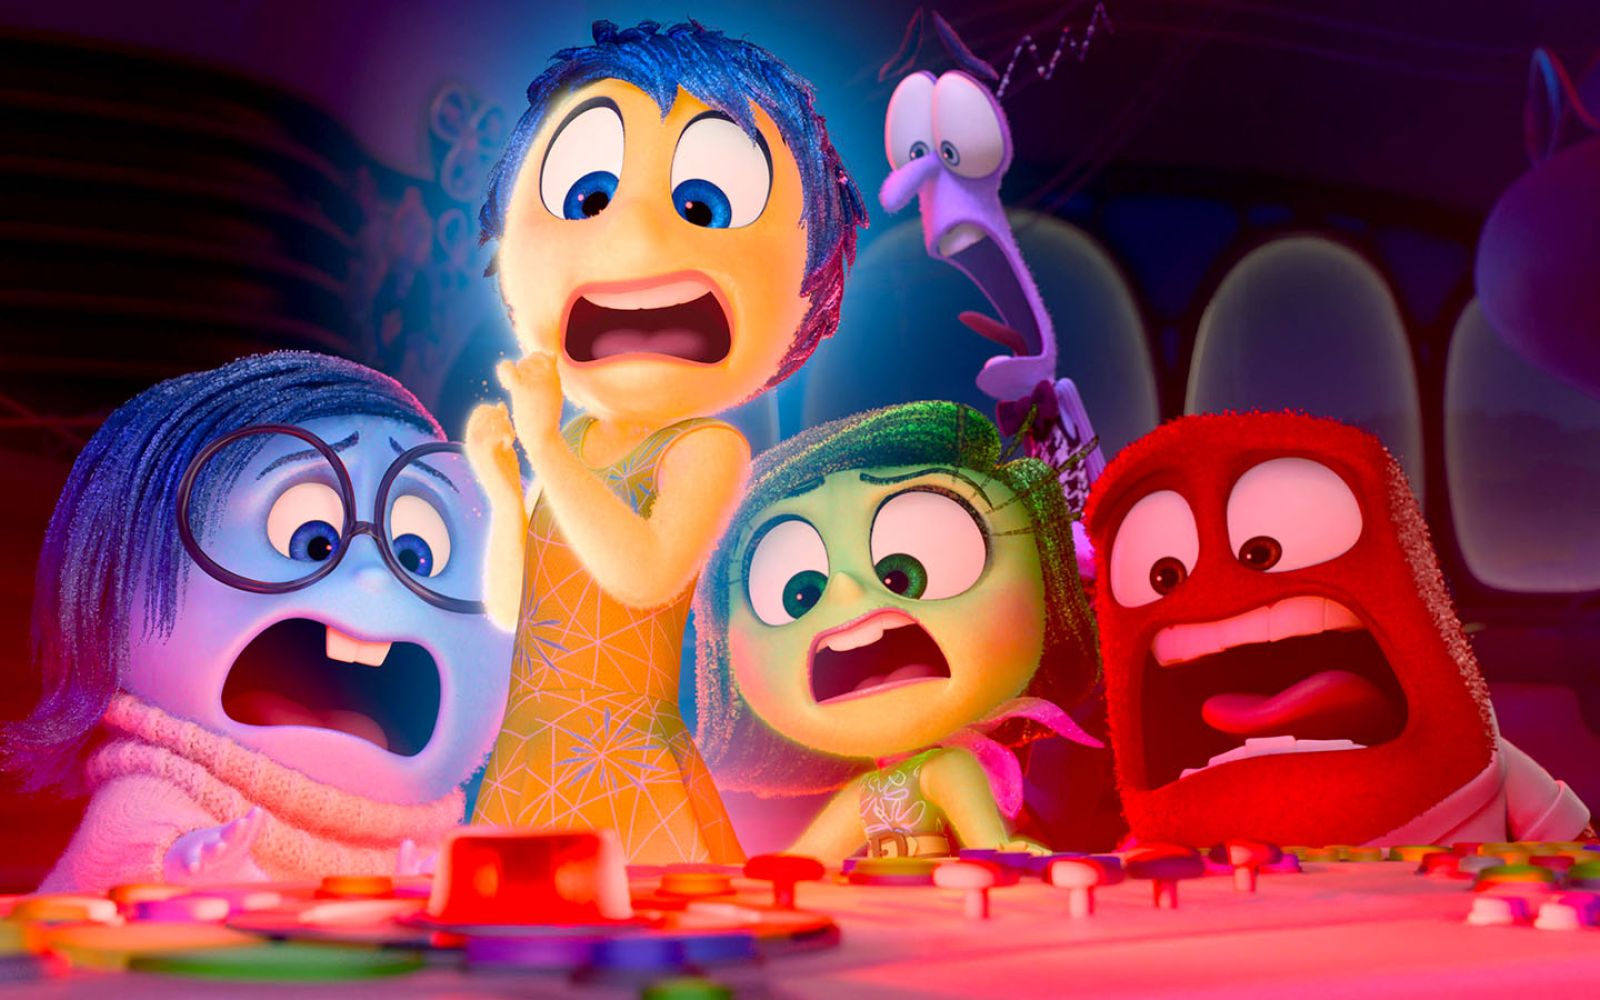 The original emotions from Inside Out are joined by some new ones in Inside Out 2.